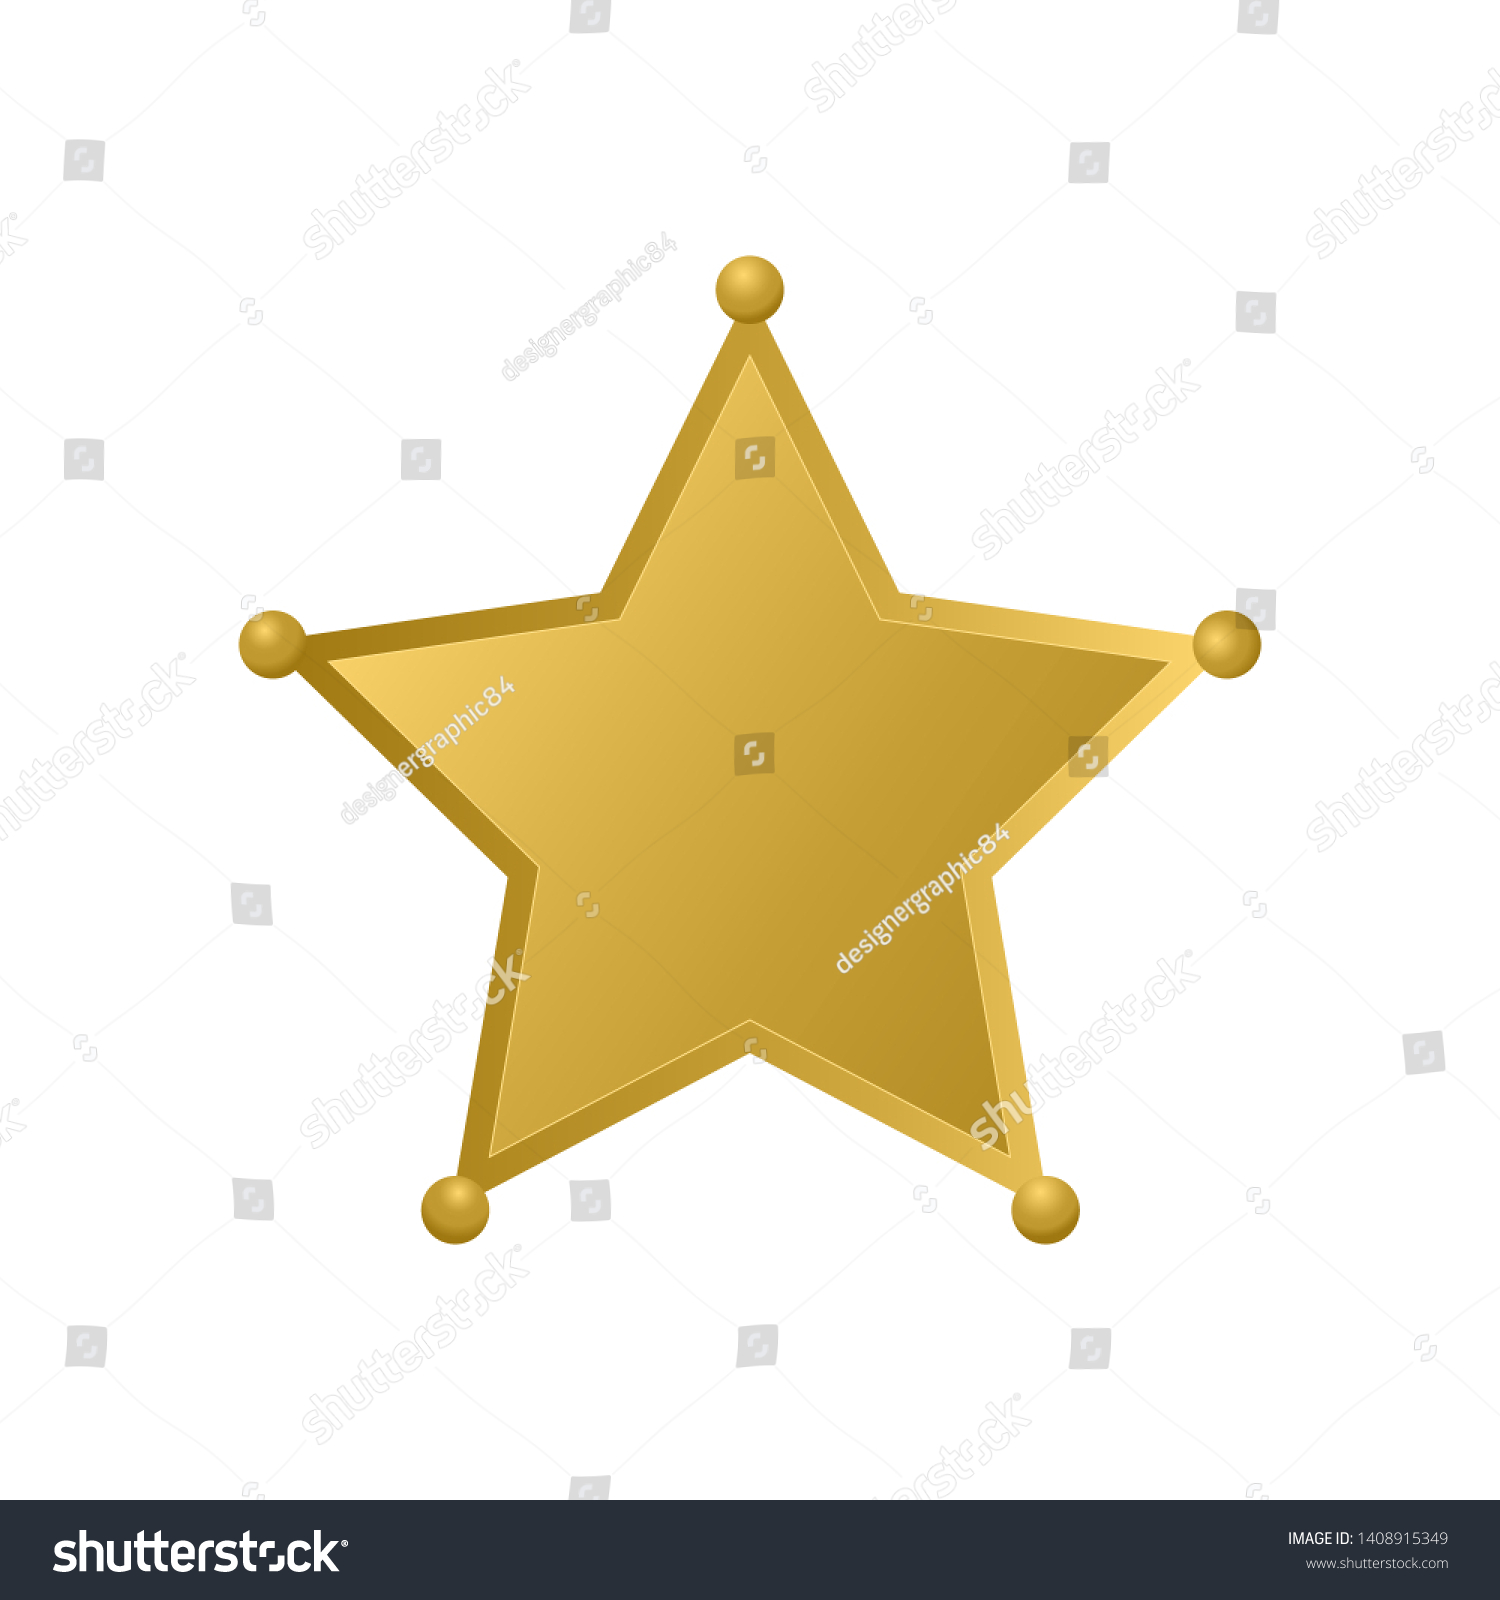 SVG of Gold Sheriff star isolated on white background. Police badge vector icon. Golden pentagonal star. Easy to edit template for your design. svg